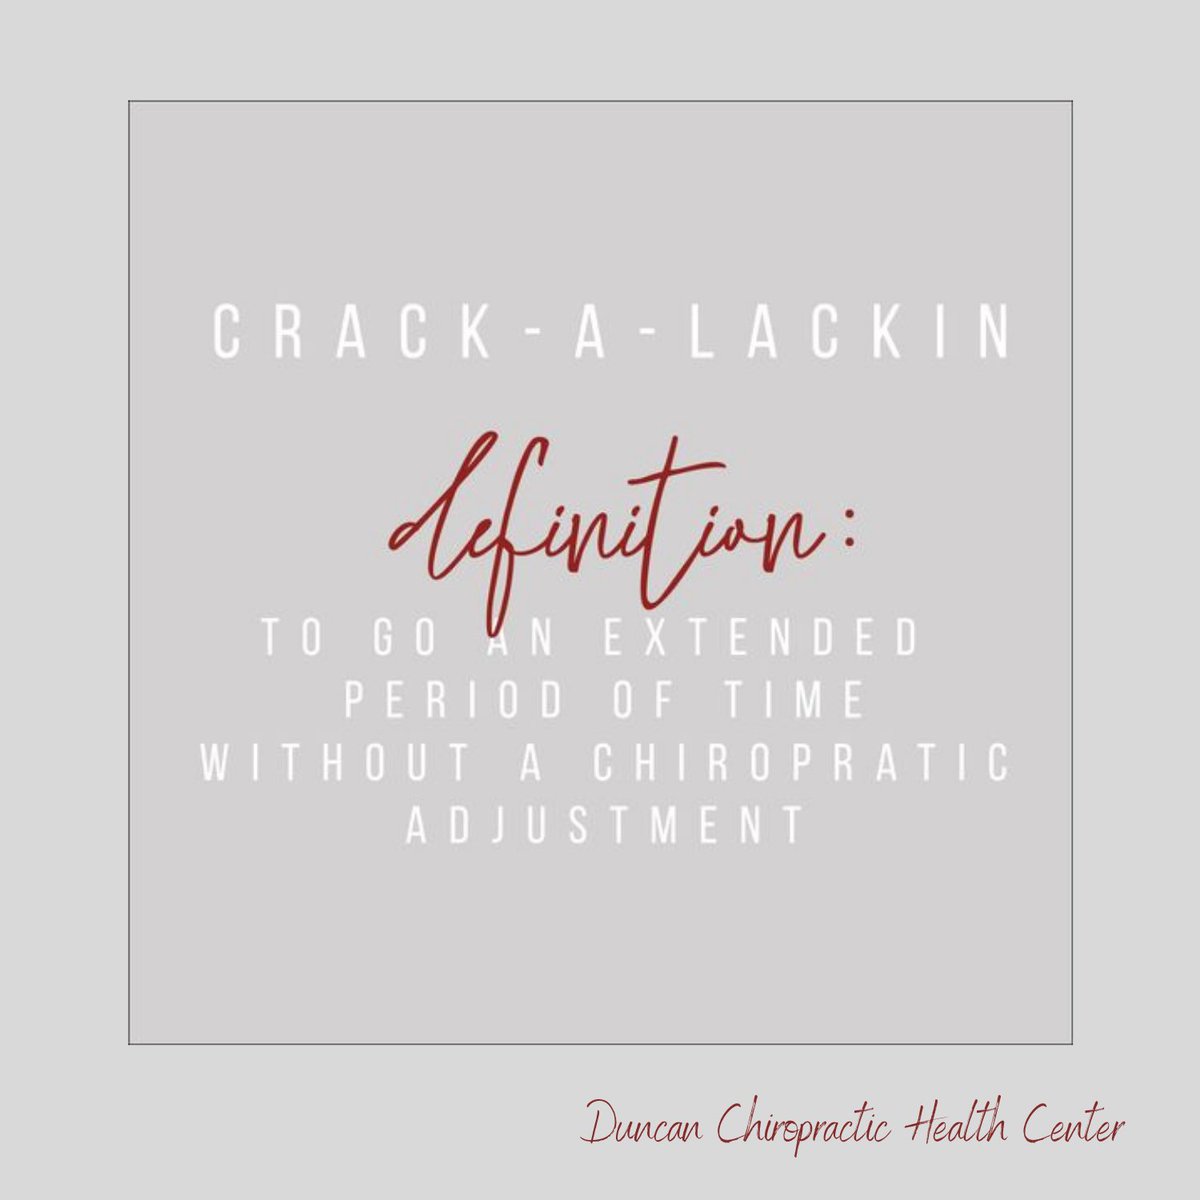 Are you crack-a-lackin'? 😆 You better give us a call/text to schedule an appointment! 🎉 402-721-6372 #bestoffremont #chiropractic #chiropractor #nebraska #fremont #fremontne #fremontnebraska #nebraskachiropractor #healthcare #healthyliving #health #healthcareprofessional